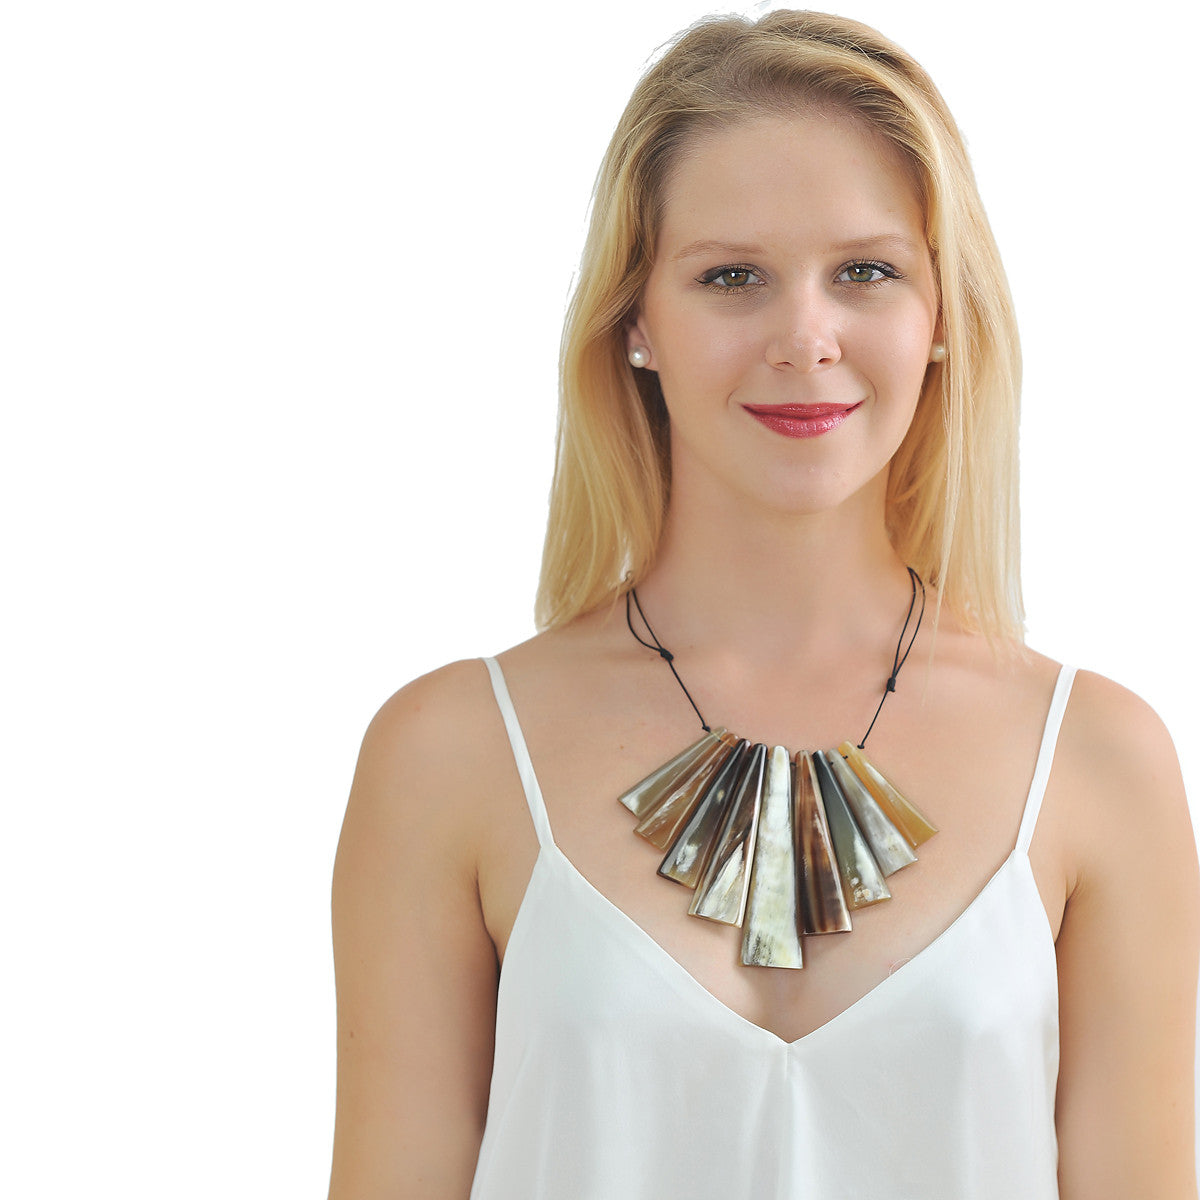 Buffalo horn statement necklace